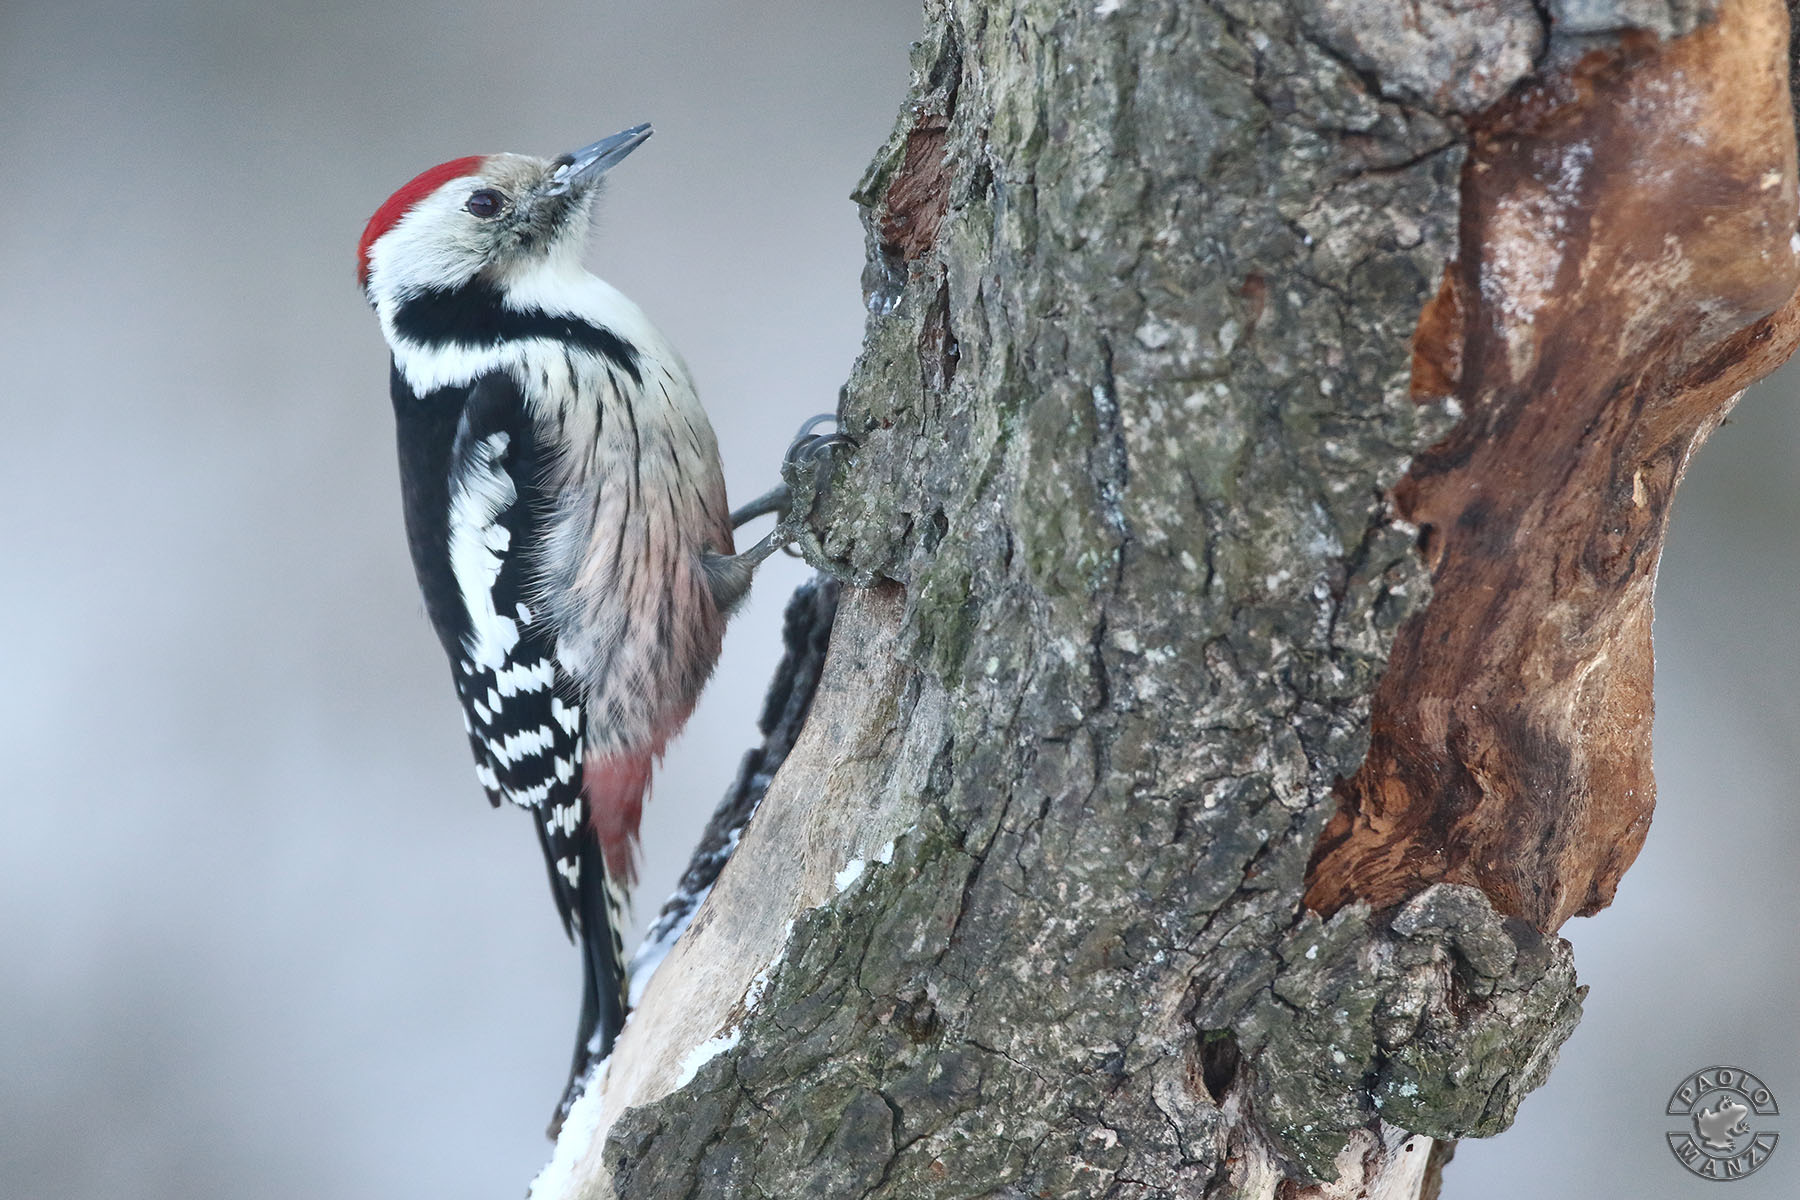 Half-Red woodpeckers...